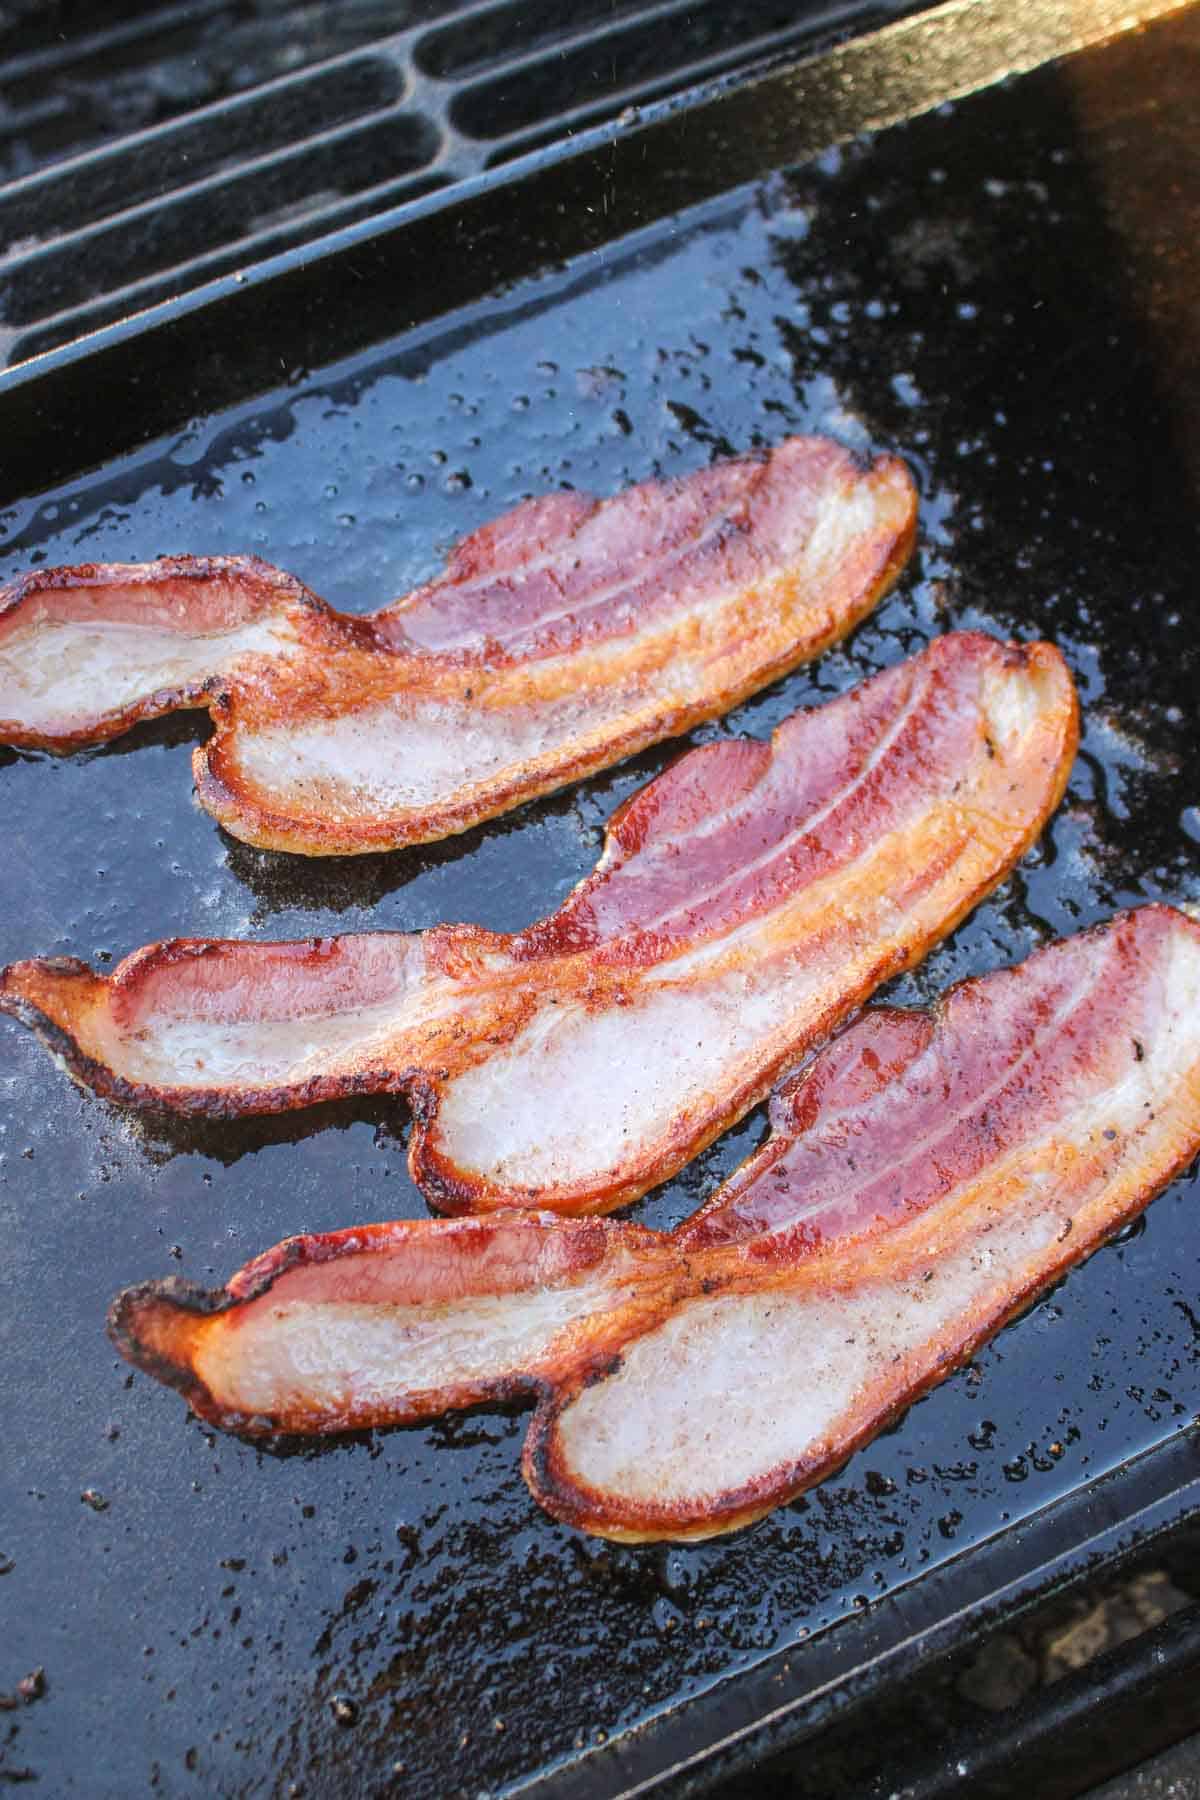 Cooking the bacon on the skillet.